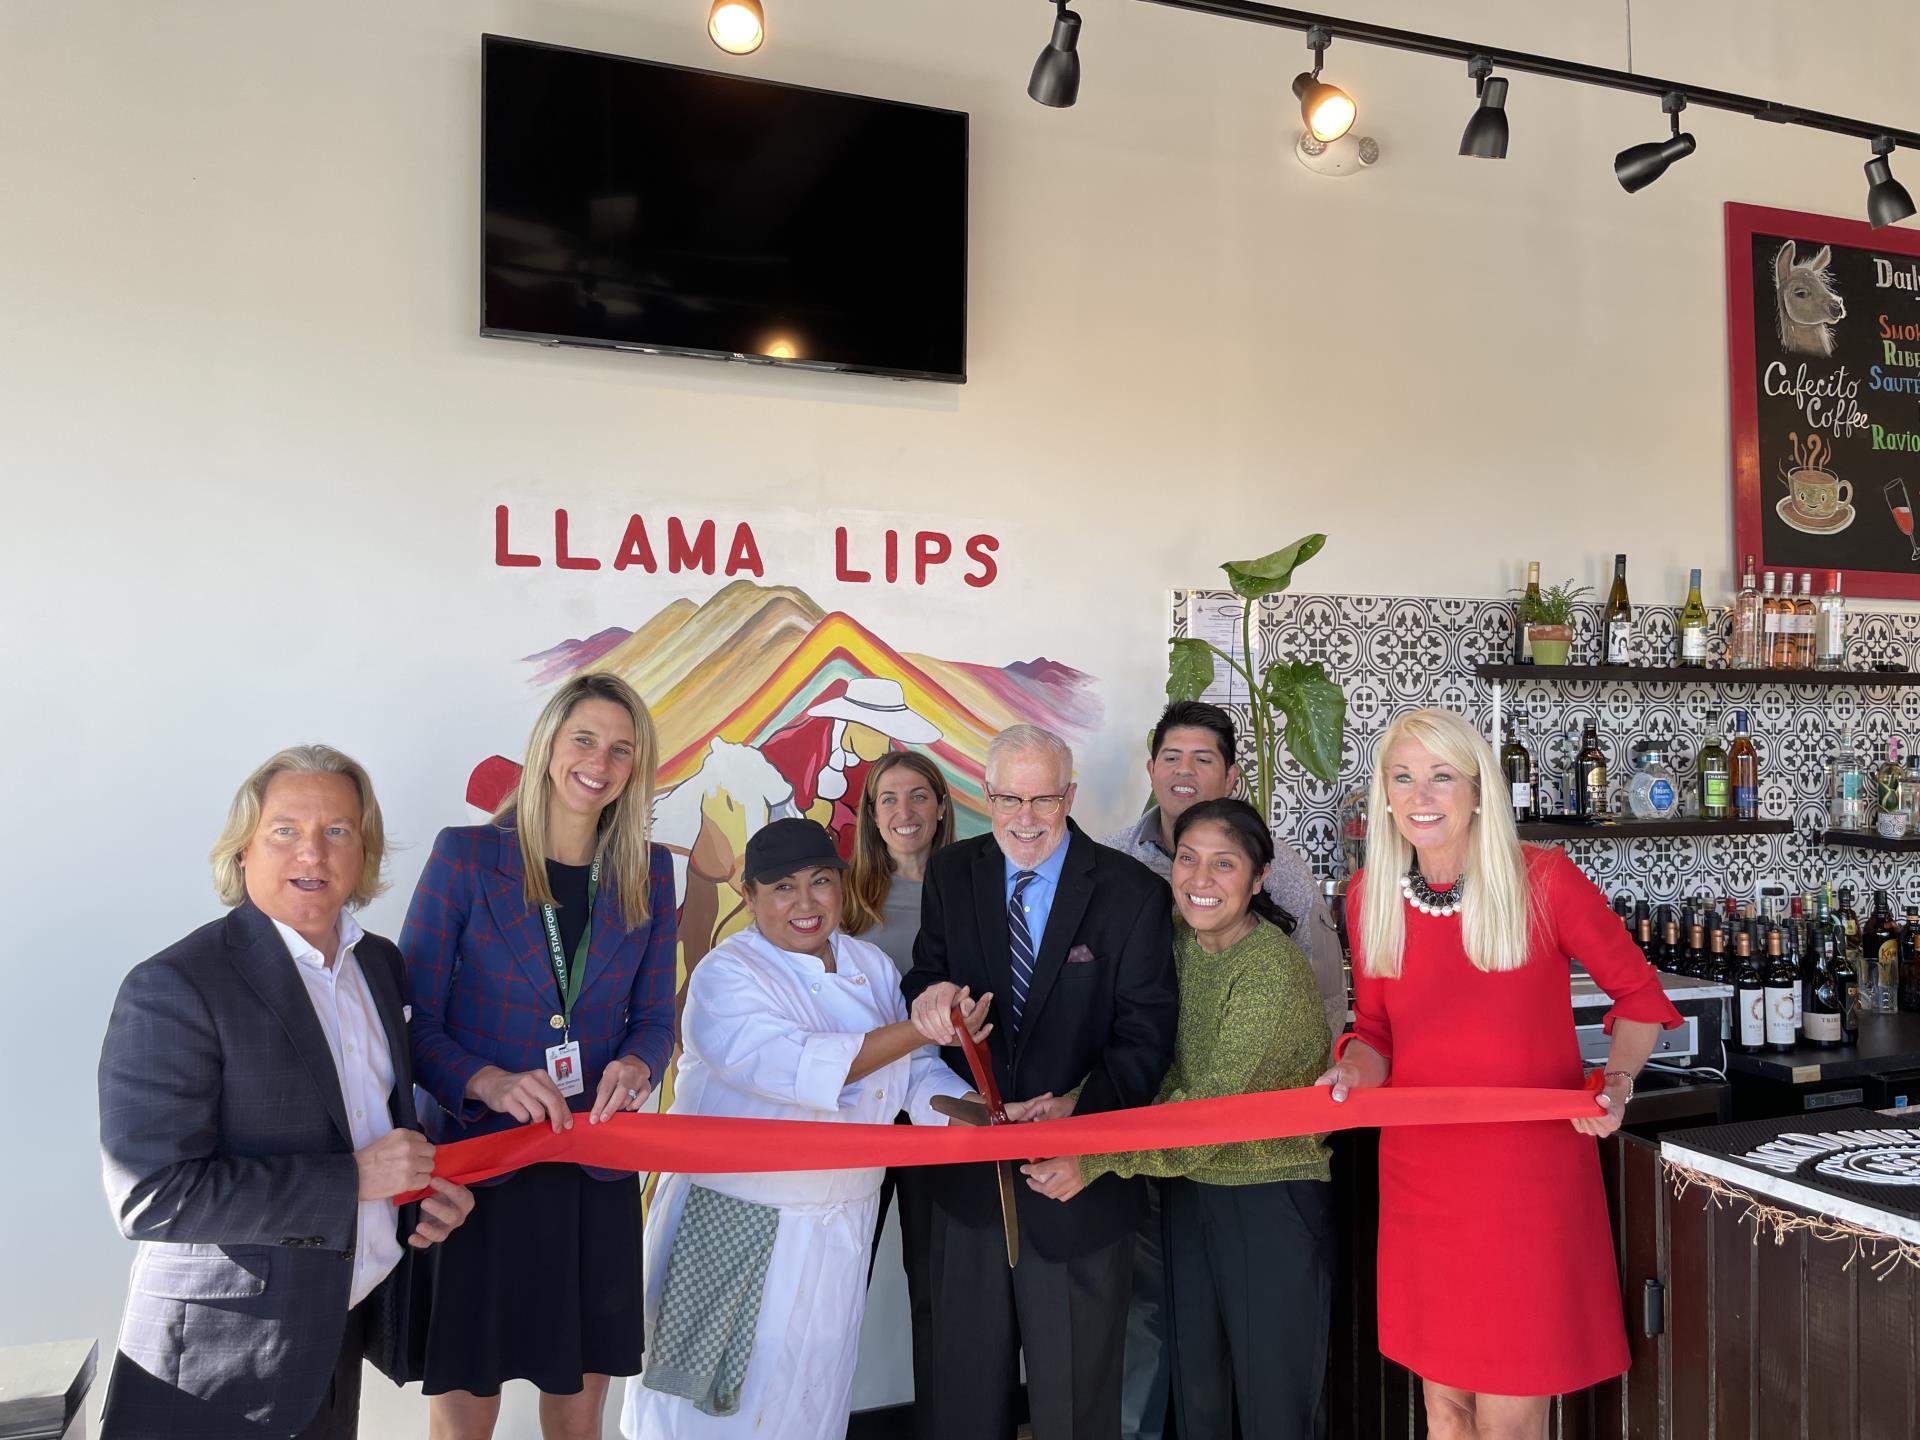 Mayor Simmons smiles for a photo with the owner of Llama Lips for their grand opening